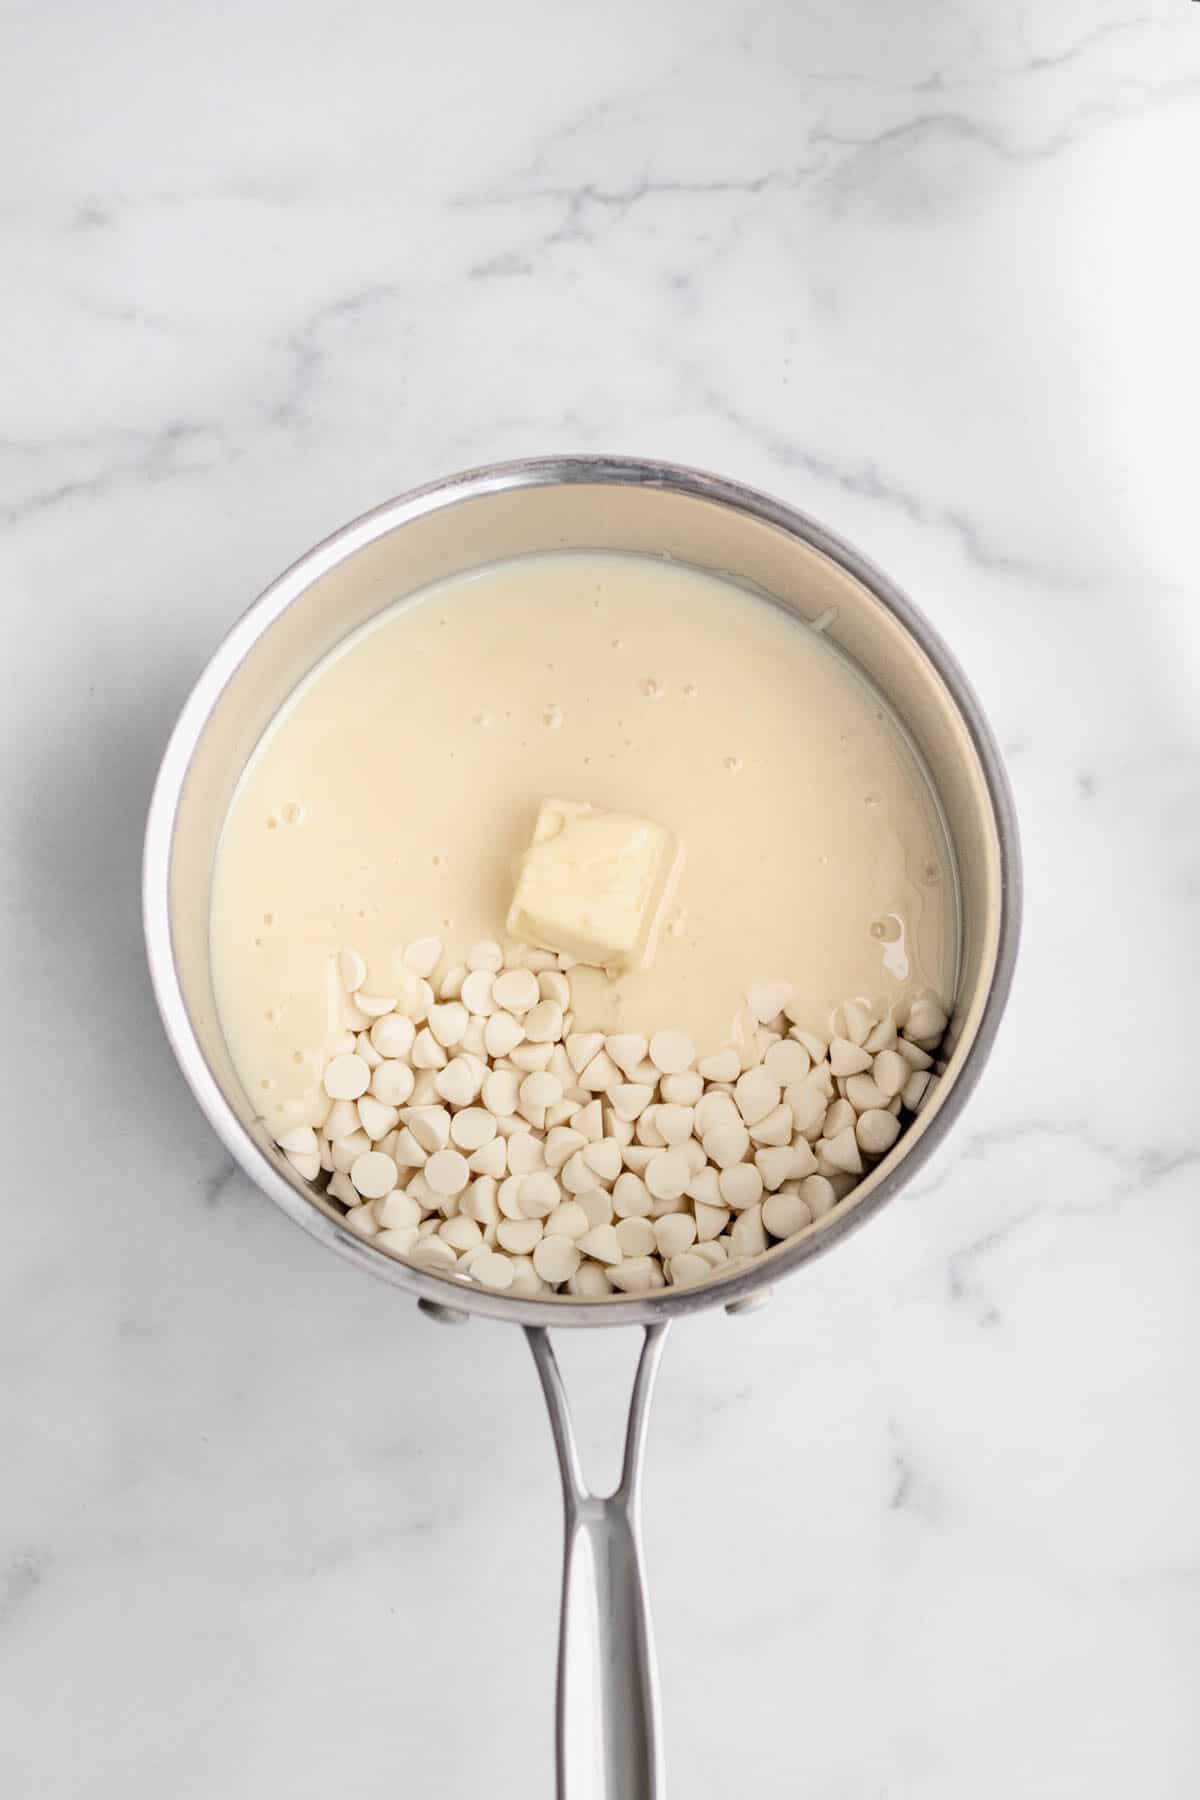 A saucepan with white chocolate chips, butter and condensed milk.